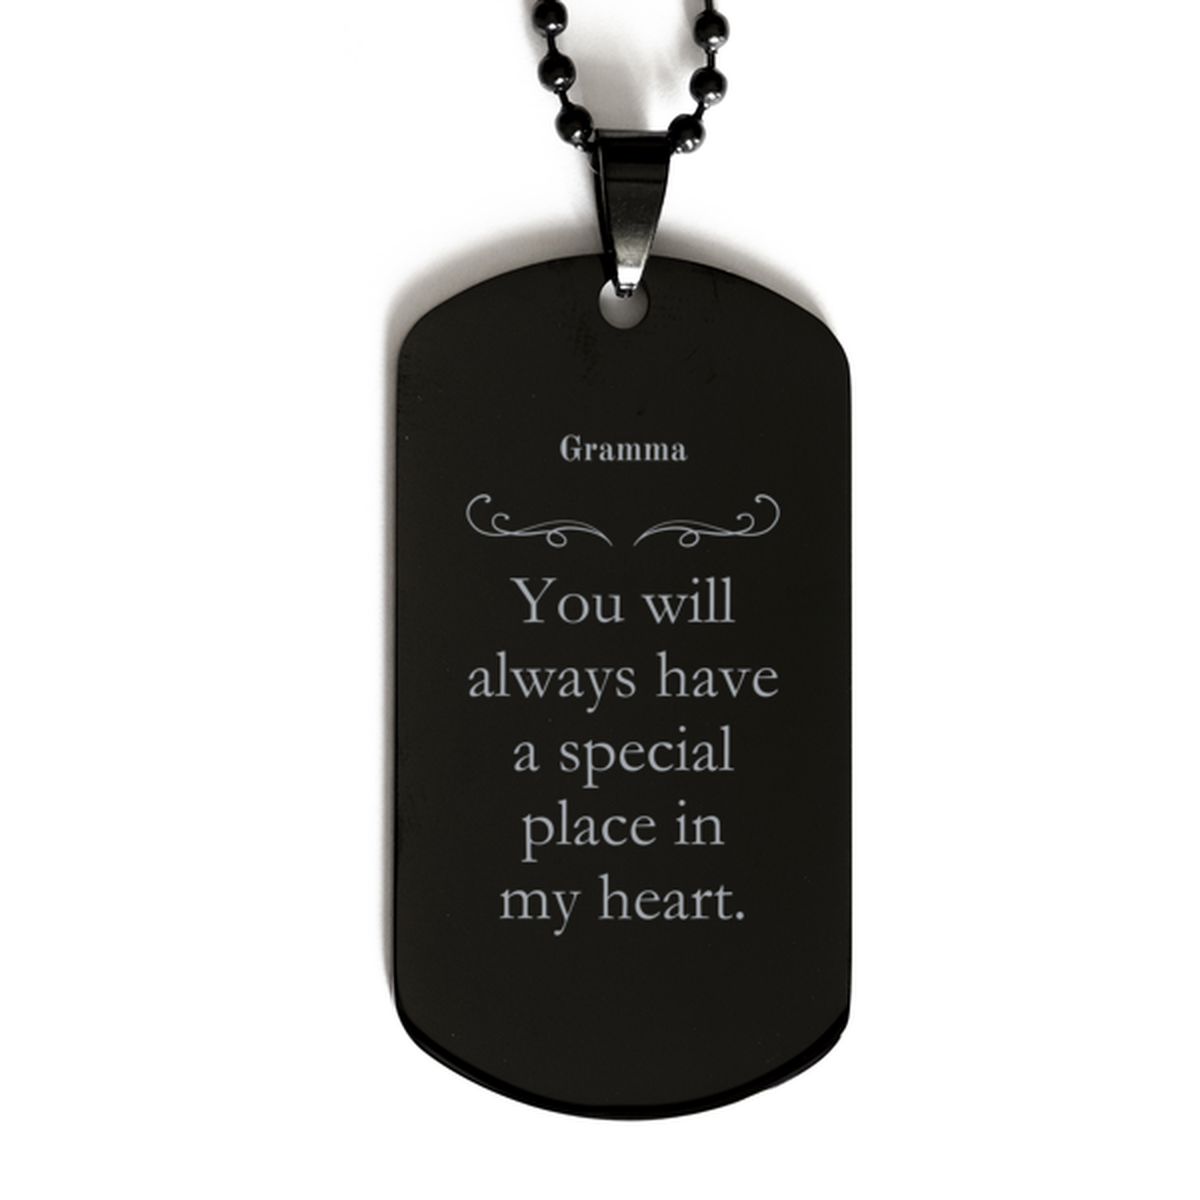 Grandma Black Dog Tag - Special Place in Heart Engraved Pendant for Christmas, Birthday, Veterans Day - Unique Gift for Grandmother